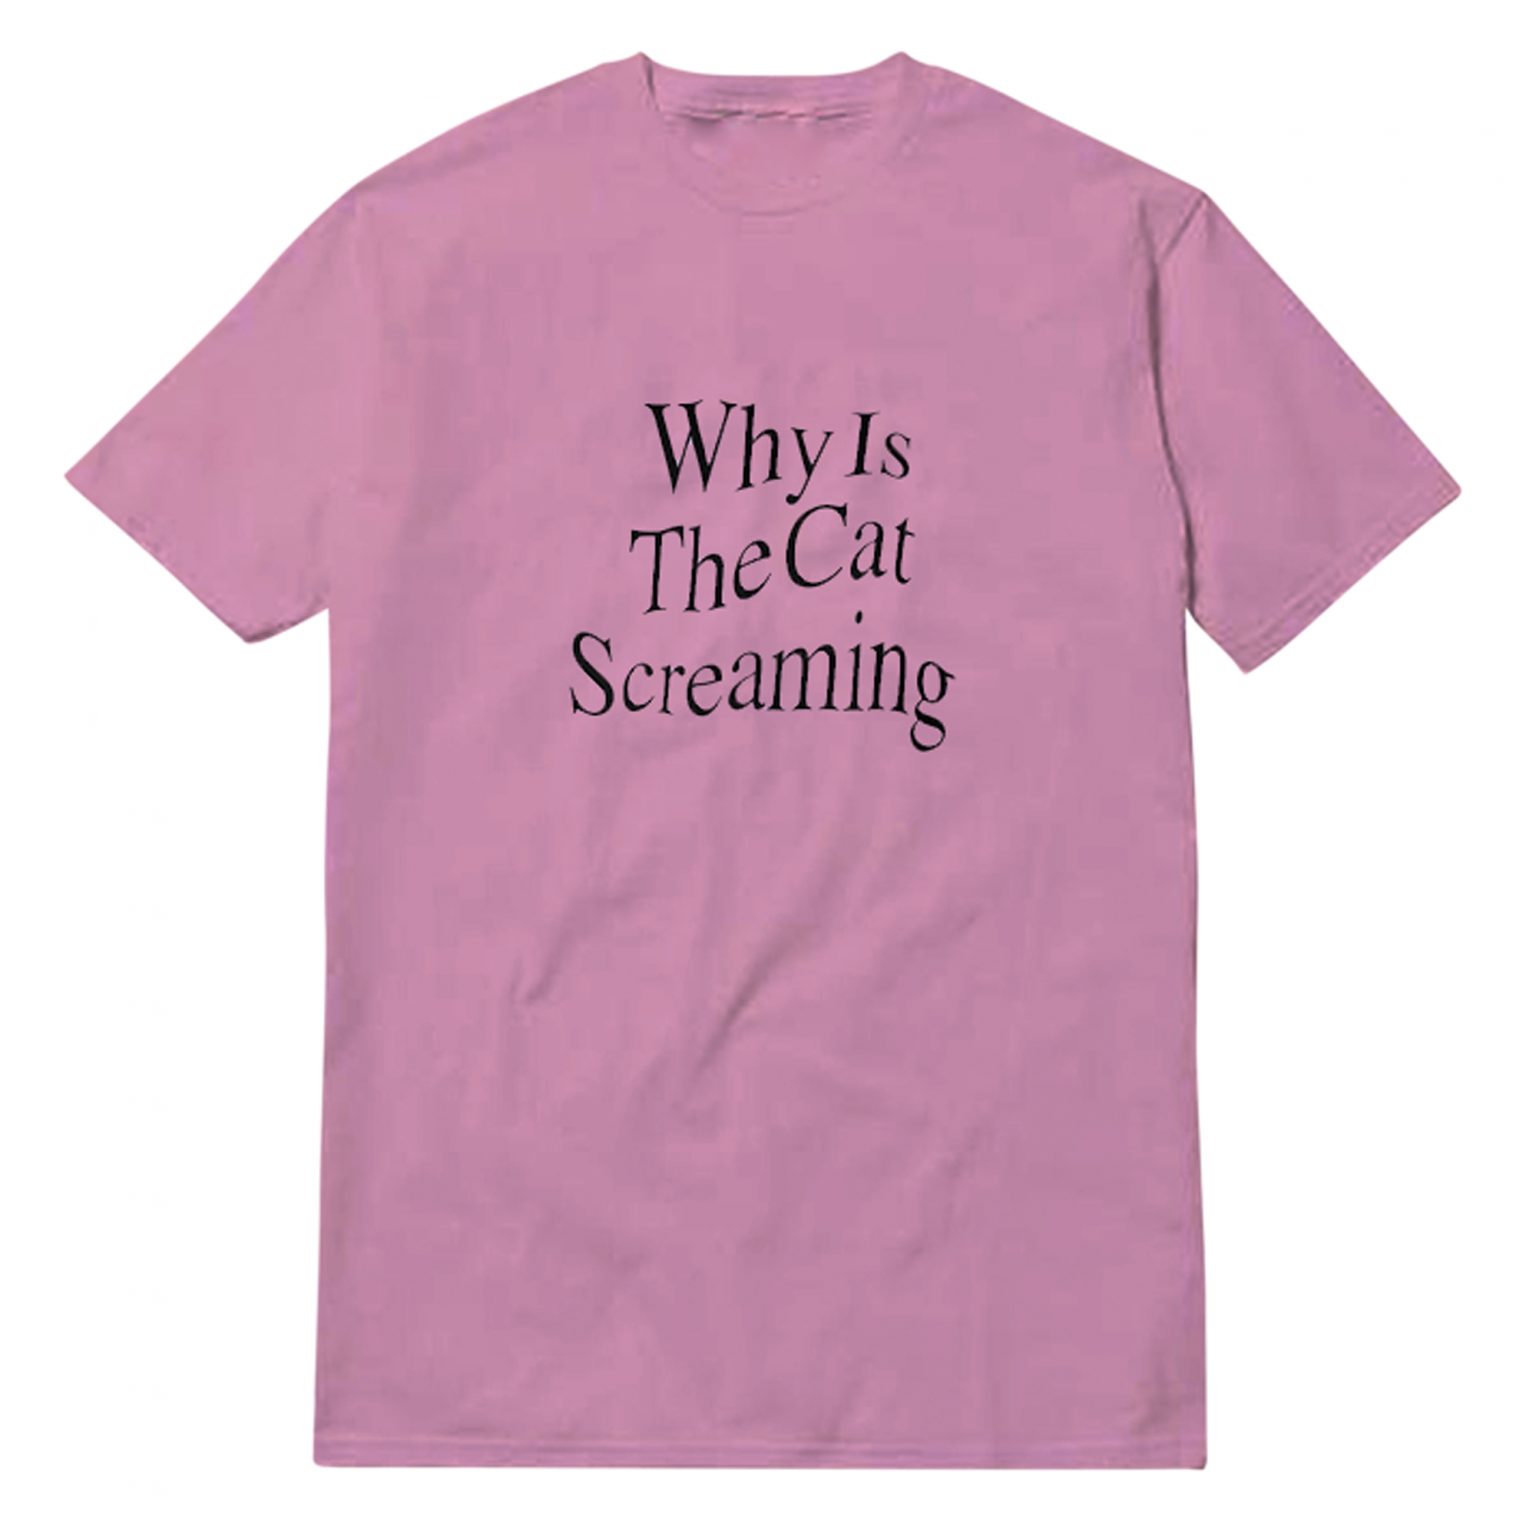 Why Is The Cat Screaming T-Shirt For Unisex